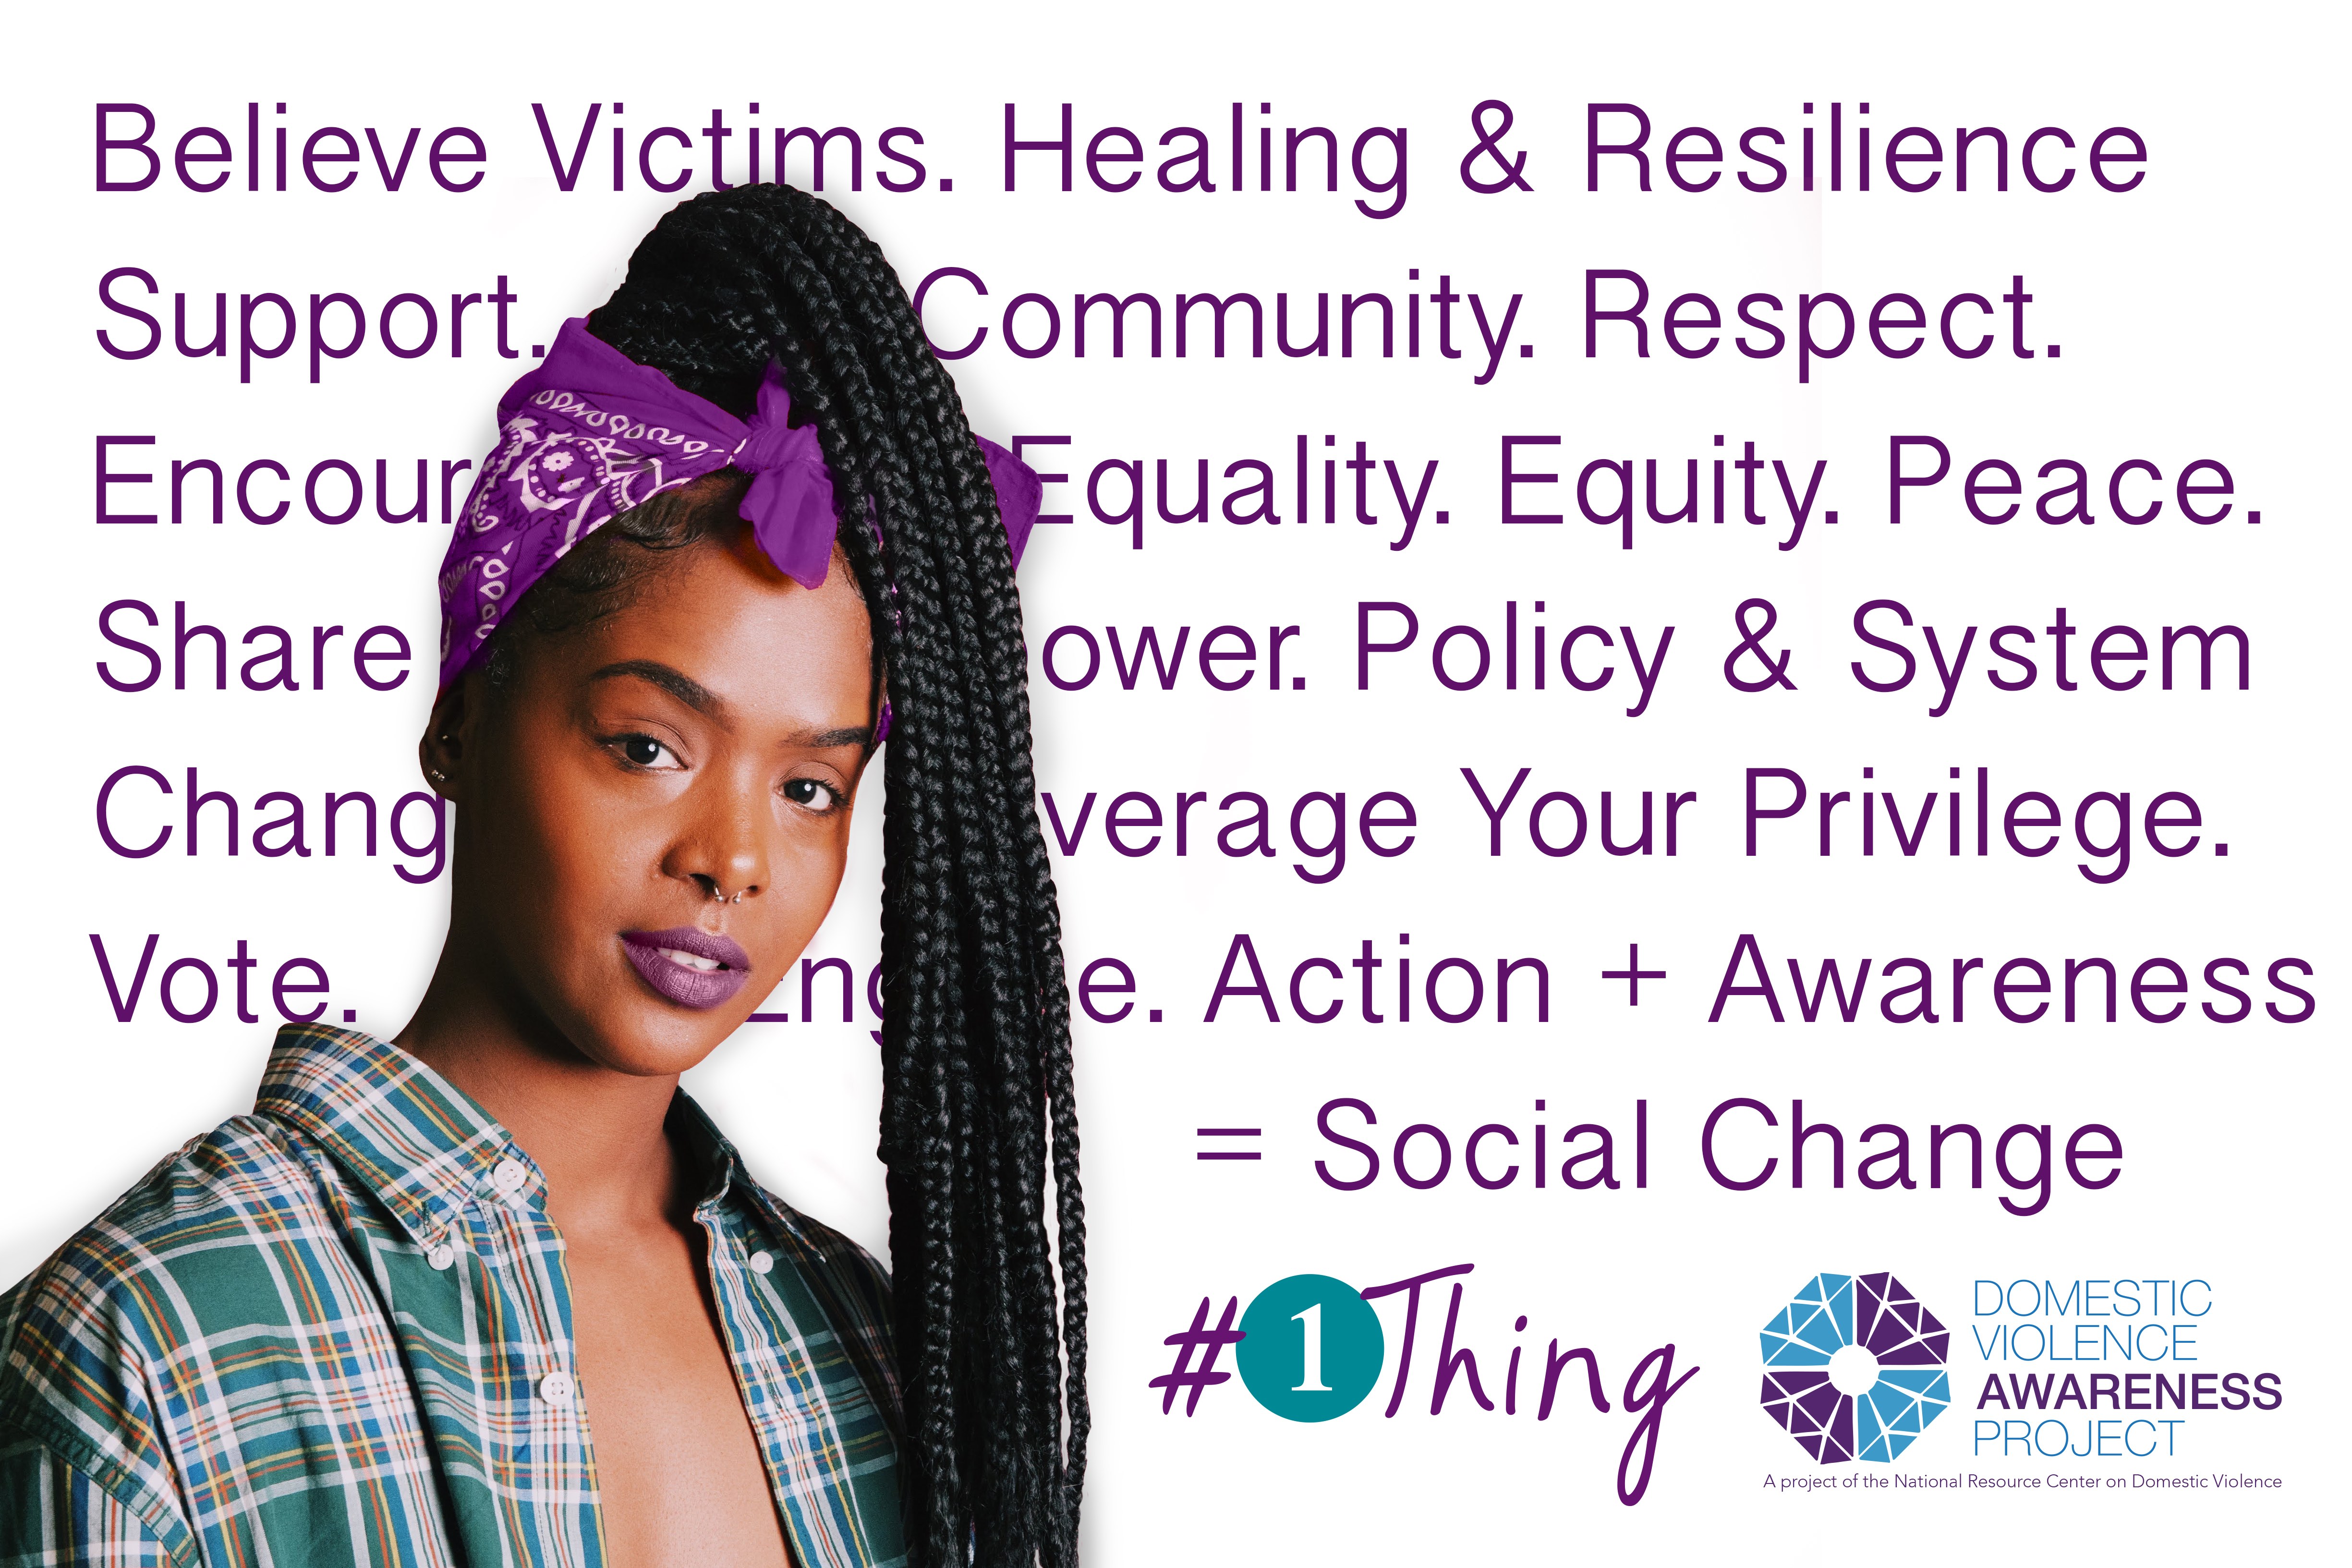 1thing image black woman support survivor text background